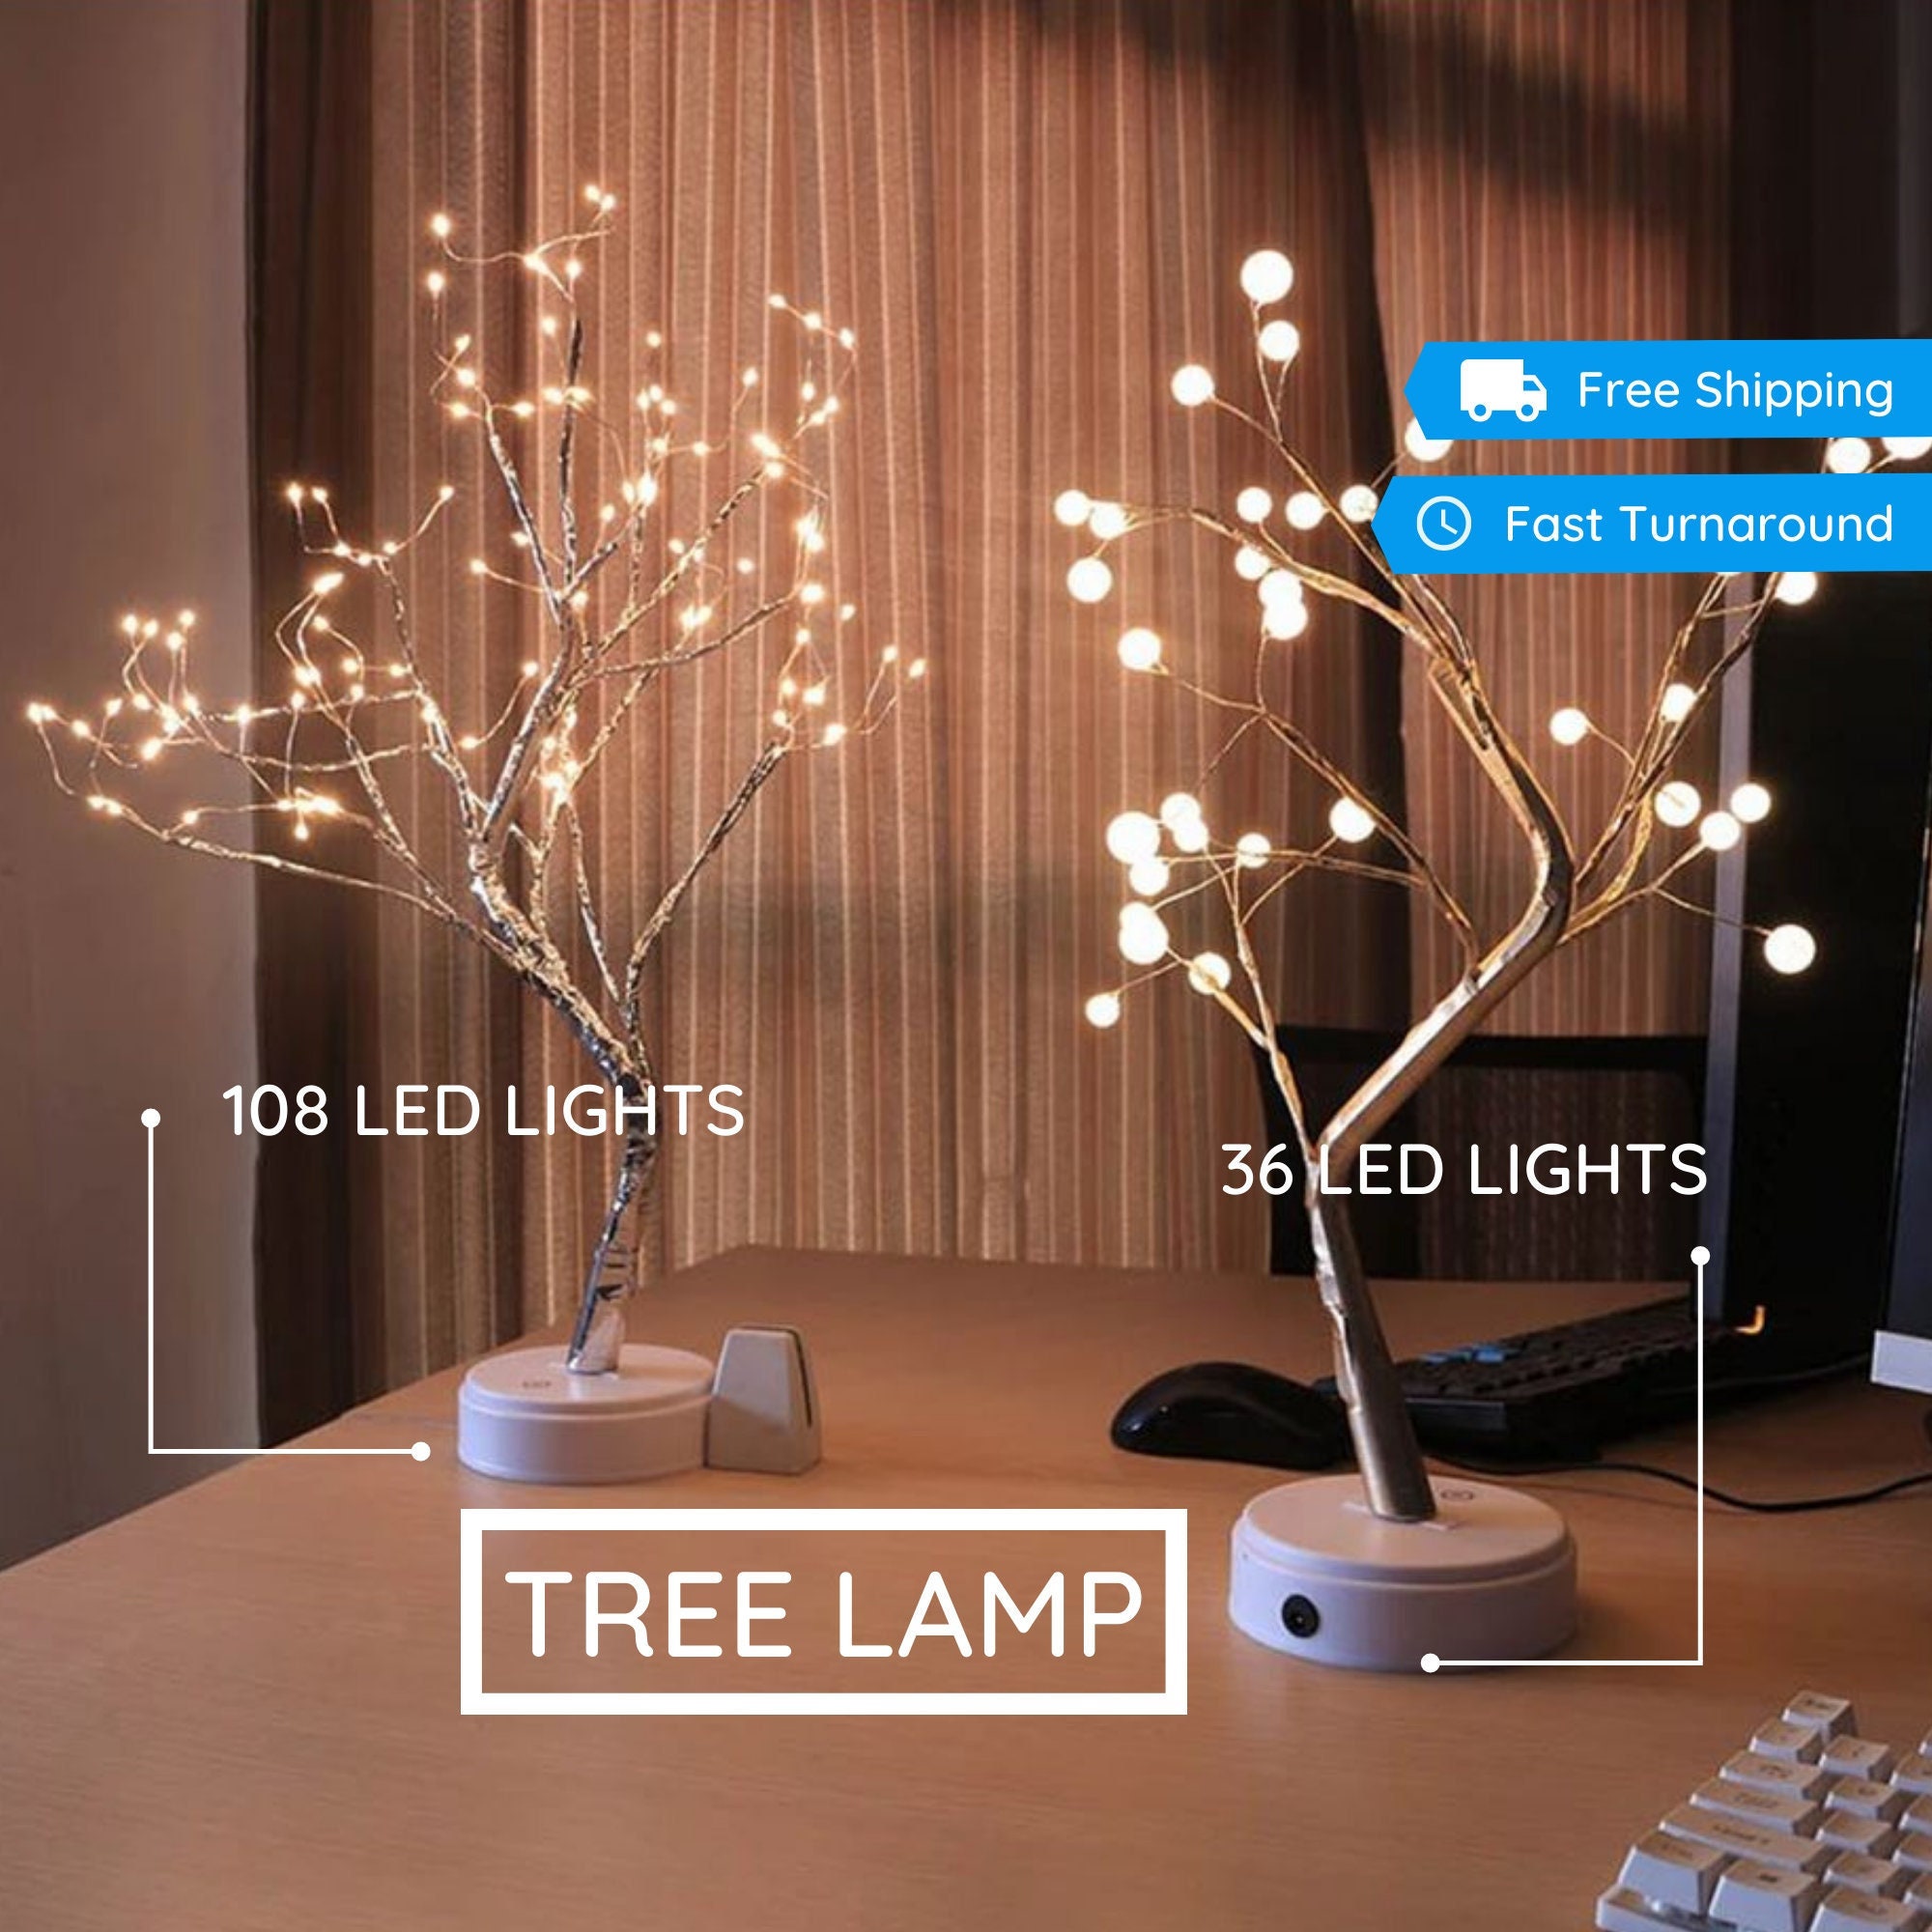 Cherry Blossom Tree Light, 35LED Lighted Tabletop Artificial Flower Bonsai  Tree Lamp USB Powered for Home Decor Room Office Party Wedding Christmas  Decorations 